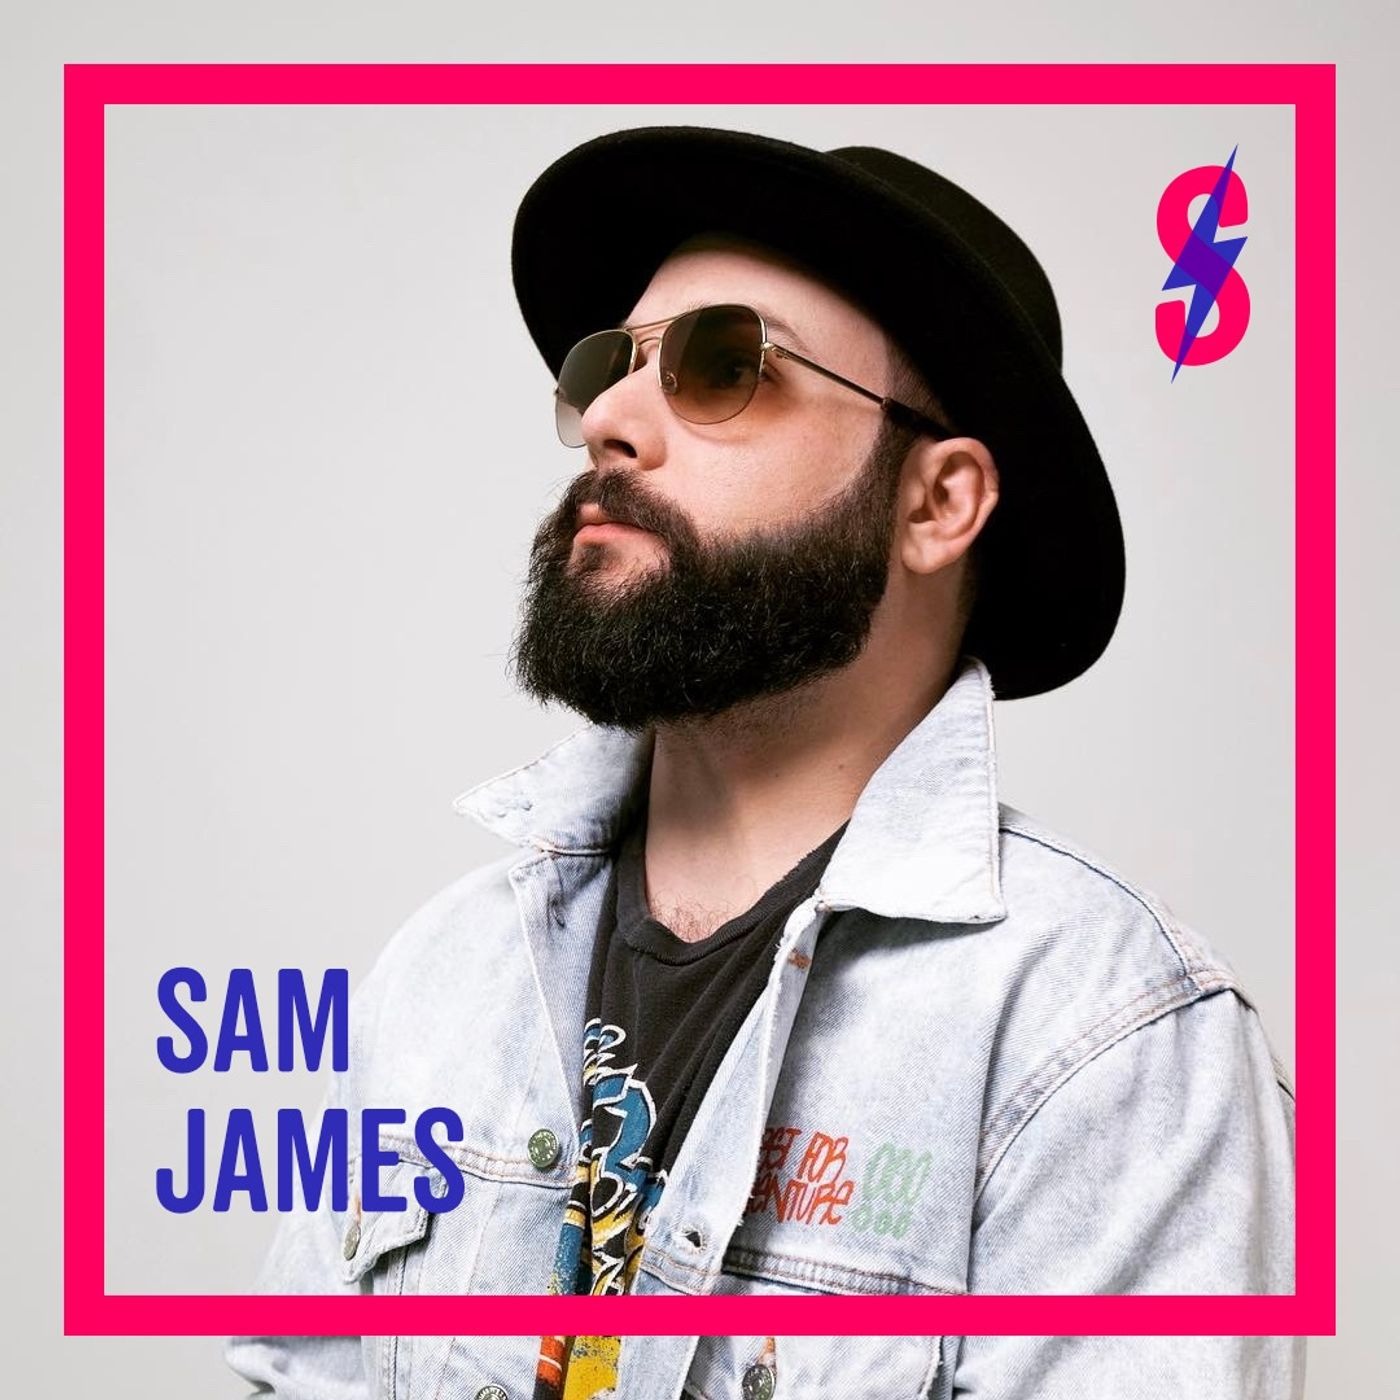 The Art Of Succeeding As A Modern Artist: Sam James Is Sparked By Dave Matthews Band's Under The Table And Dreaming